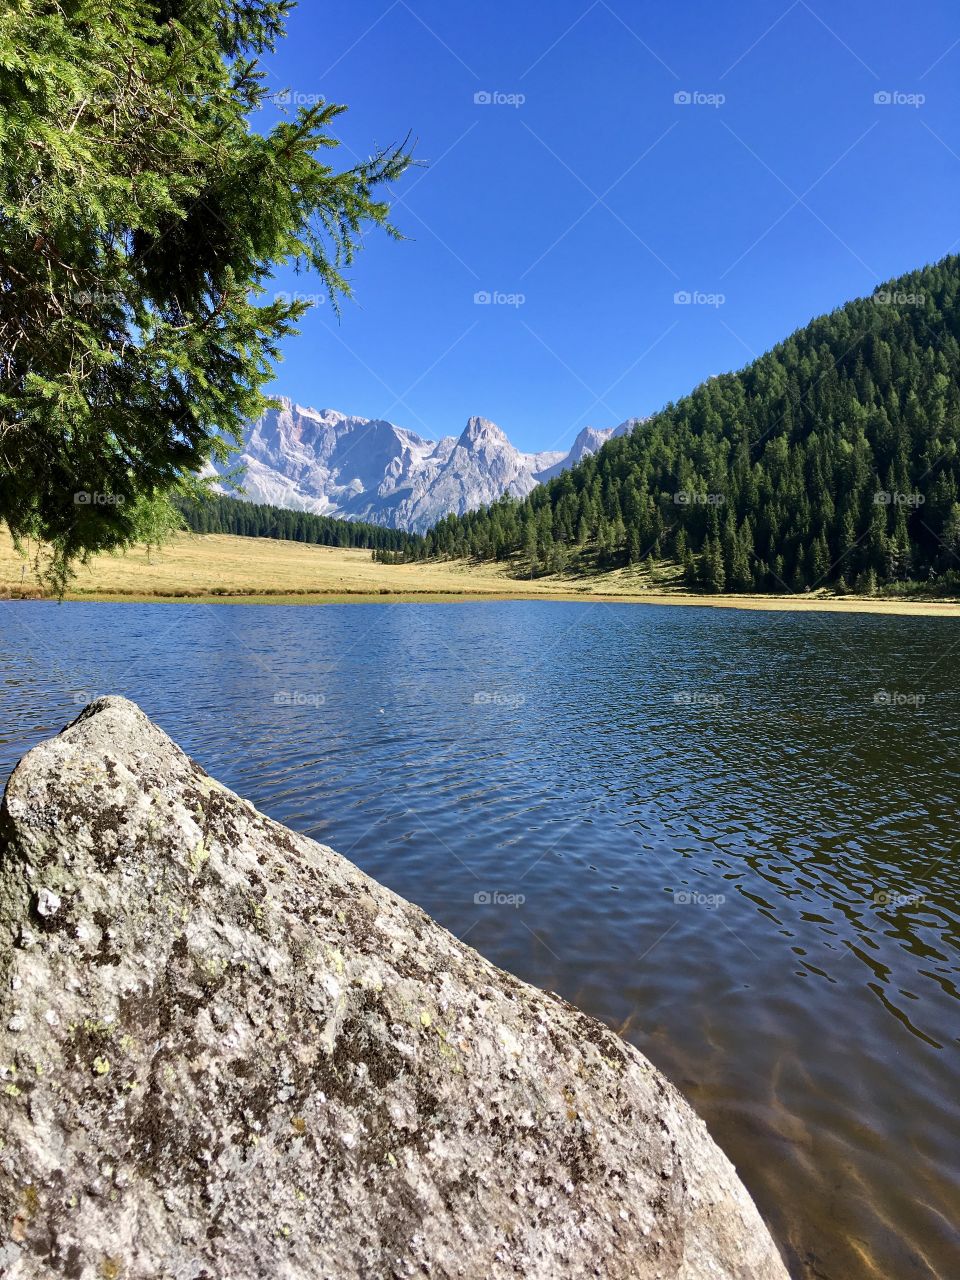 Lake Calaita, located at 1600 meters, south-eastern Trentino, in the background the Pale di San Martino